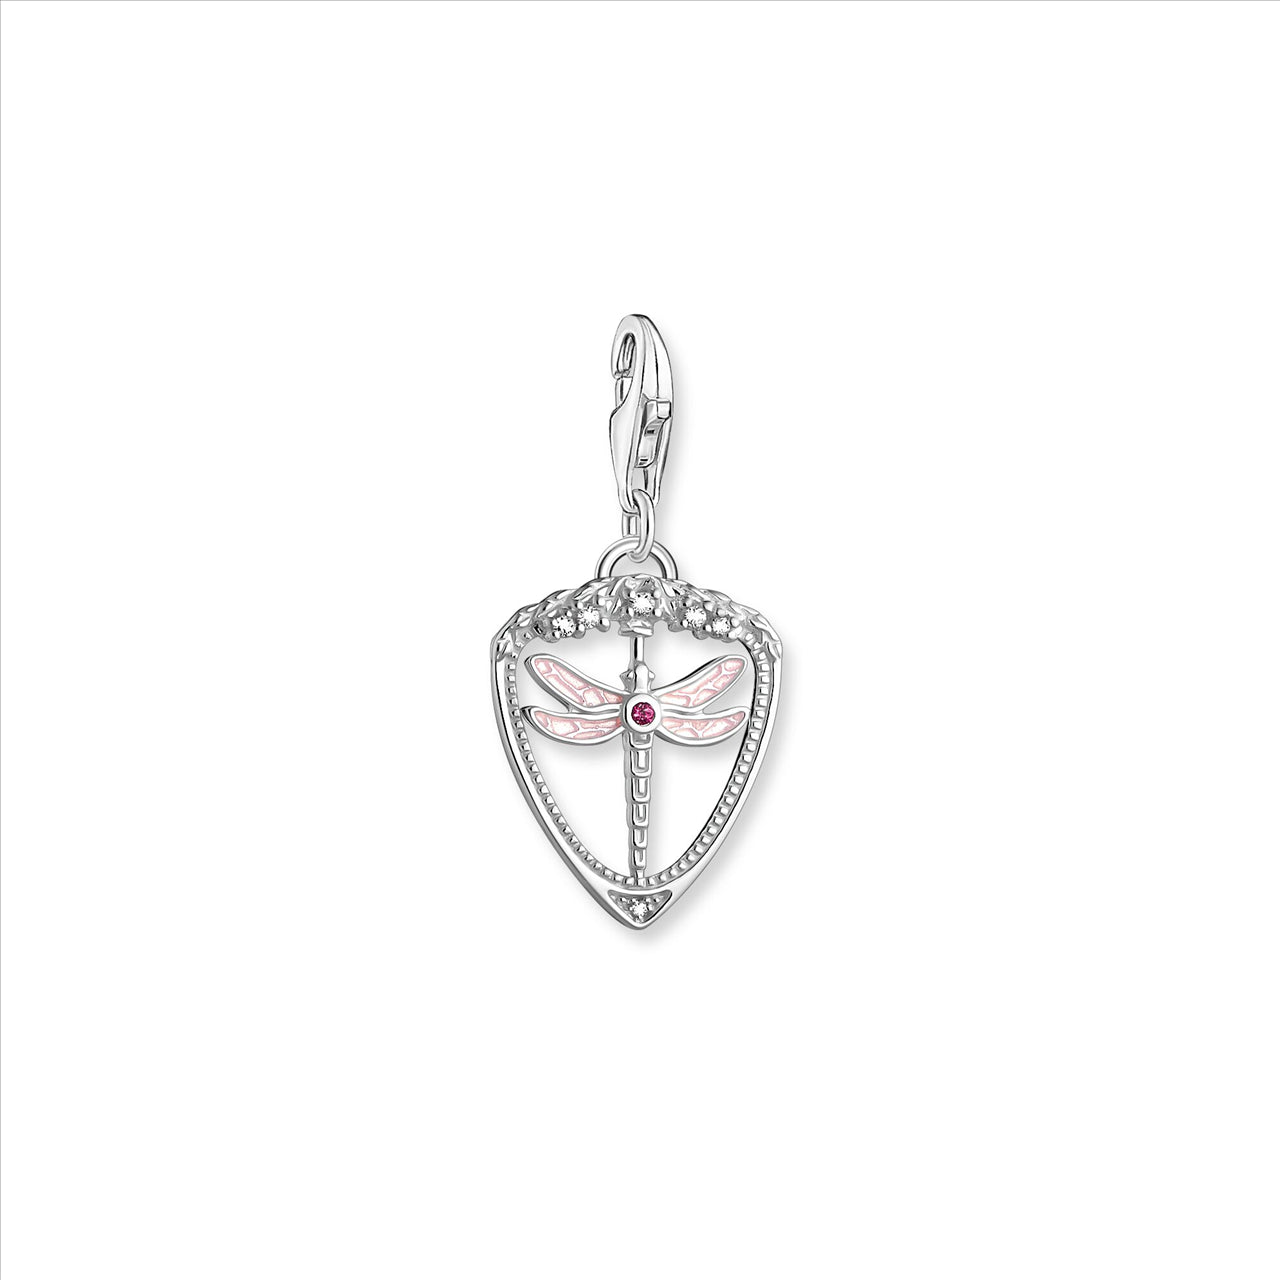 Thomas Sabo "Dragonfly" Spinner Charm Sterling Silver